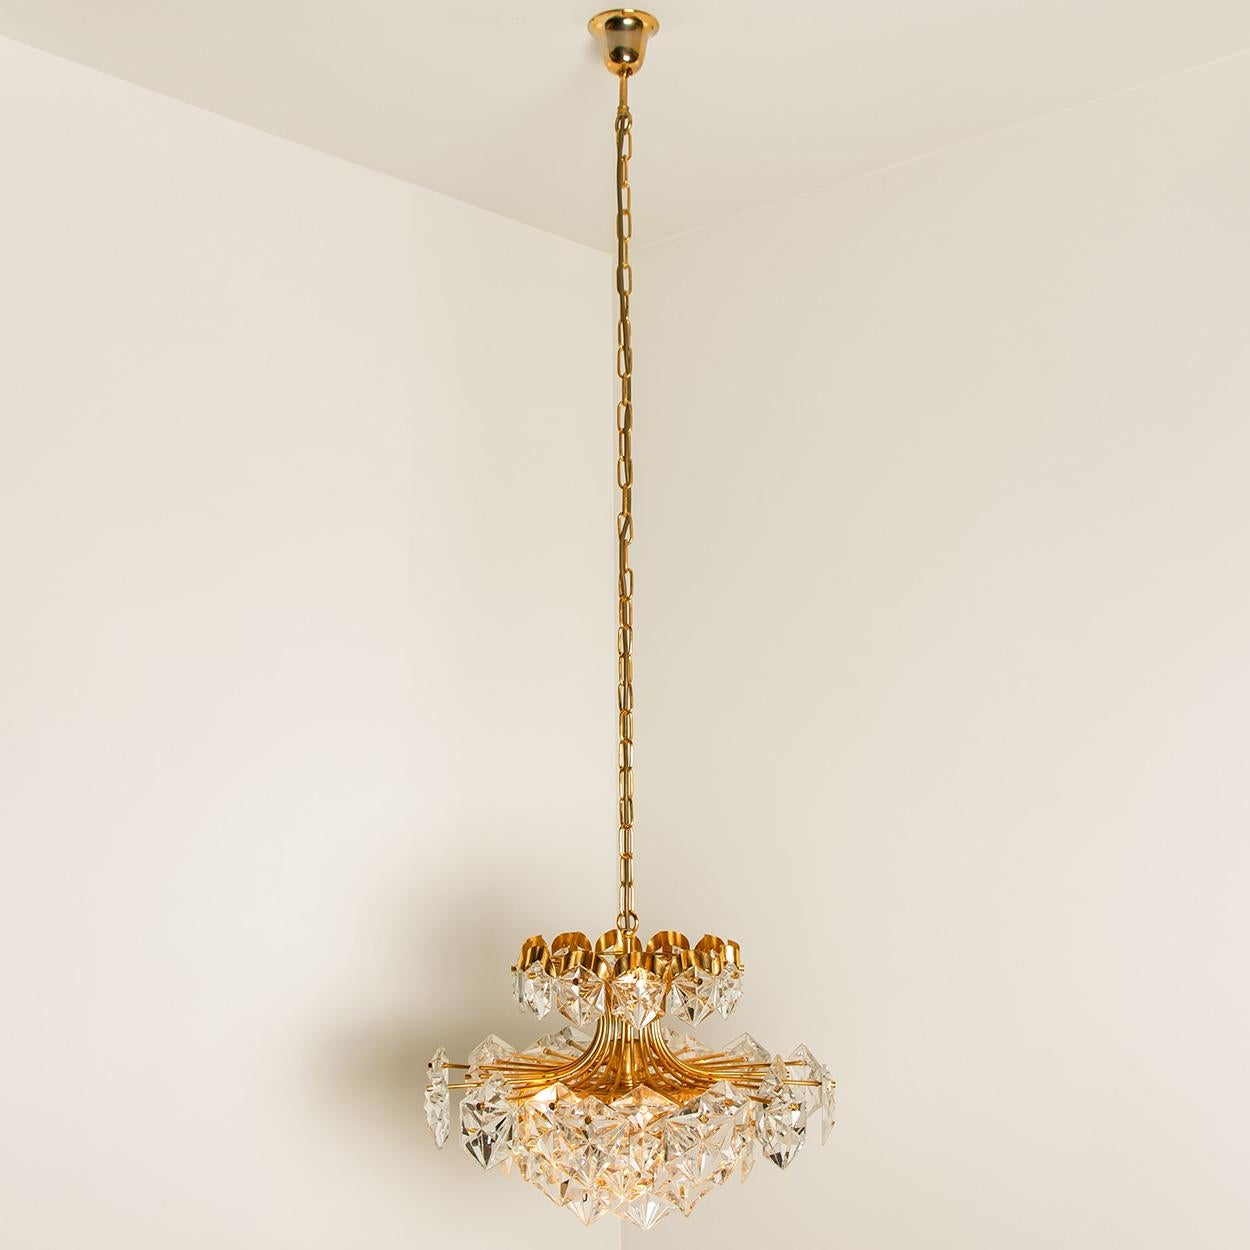 Pair of Two Layer Faceted Crystal Chandeliers Kinkeldey, 1970 For Sale 3